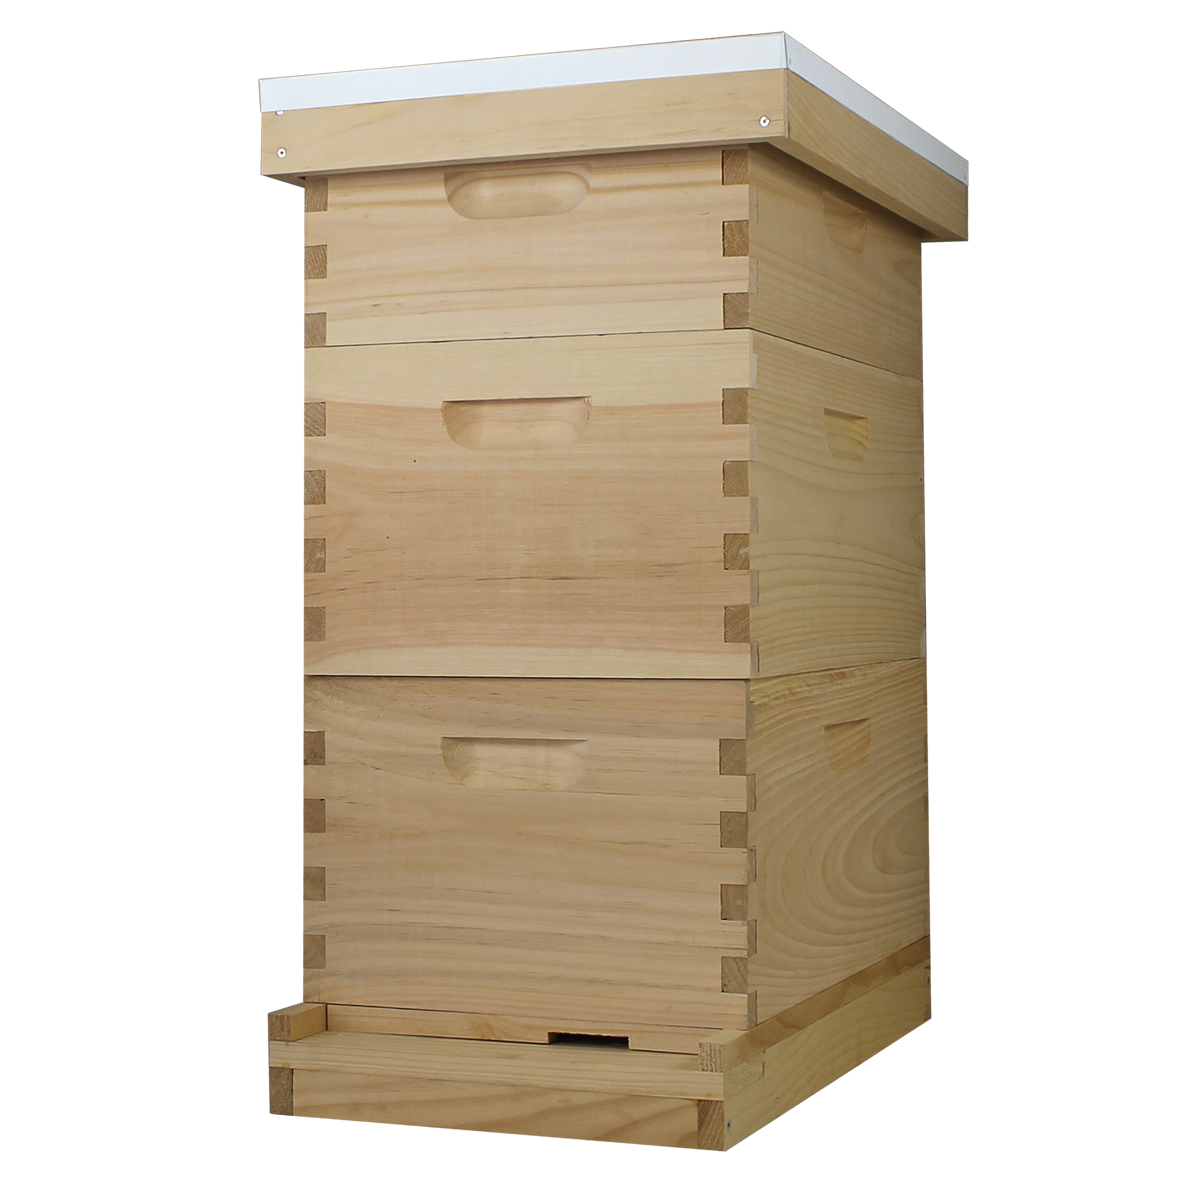 Busy Bees 'N' More Amish Made 8 Frame Beehive With 2 Deep Bee Boxes & 1 Medium Bee Box